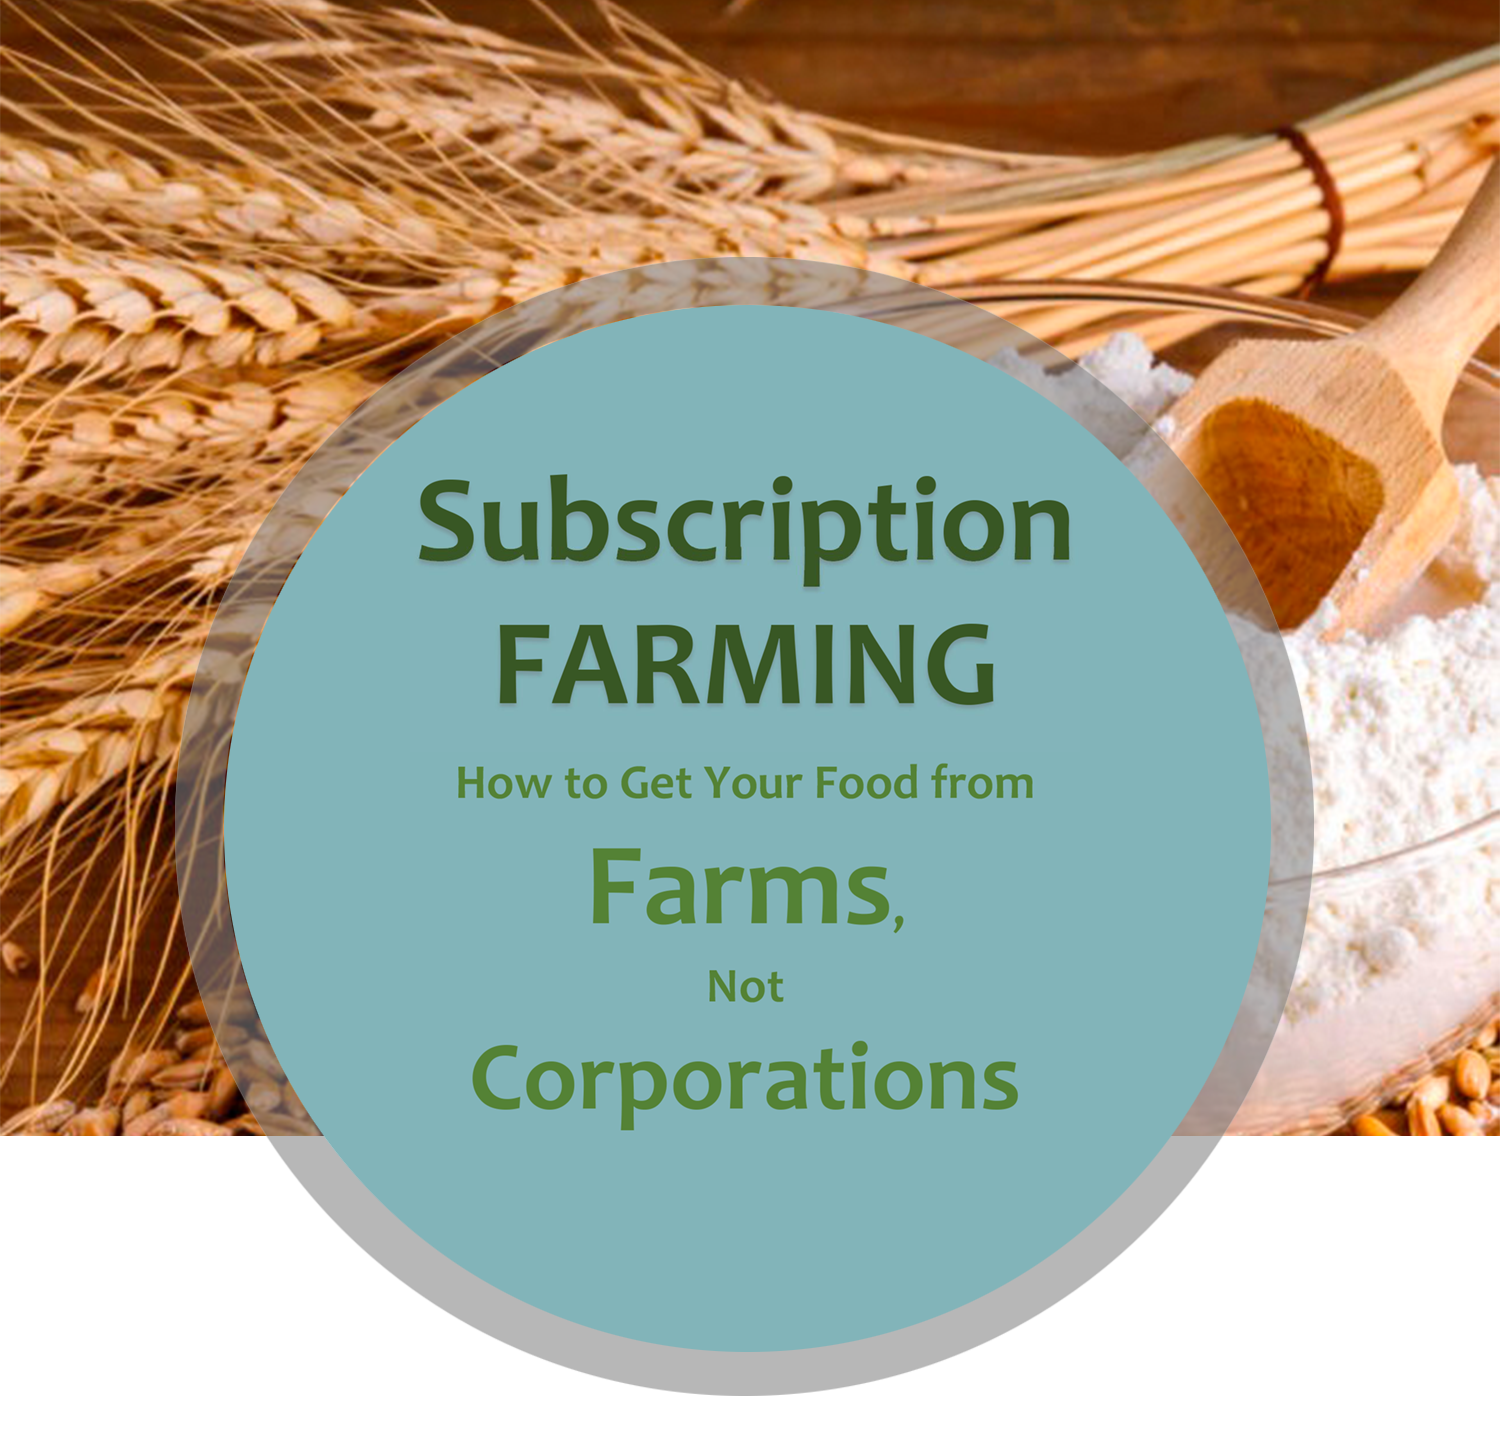 Paigambari Farm is a wheat-oriented subscription-based farming solution to our corrupt and manipulated Farming practices, we are a group of Farm Families working on this model where people can subscribe a agricultural land yearly as per their requirement.